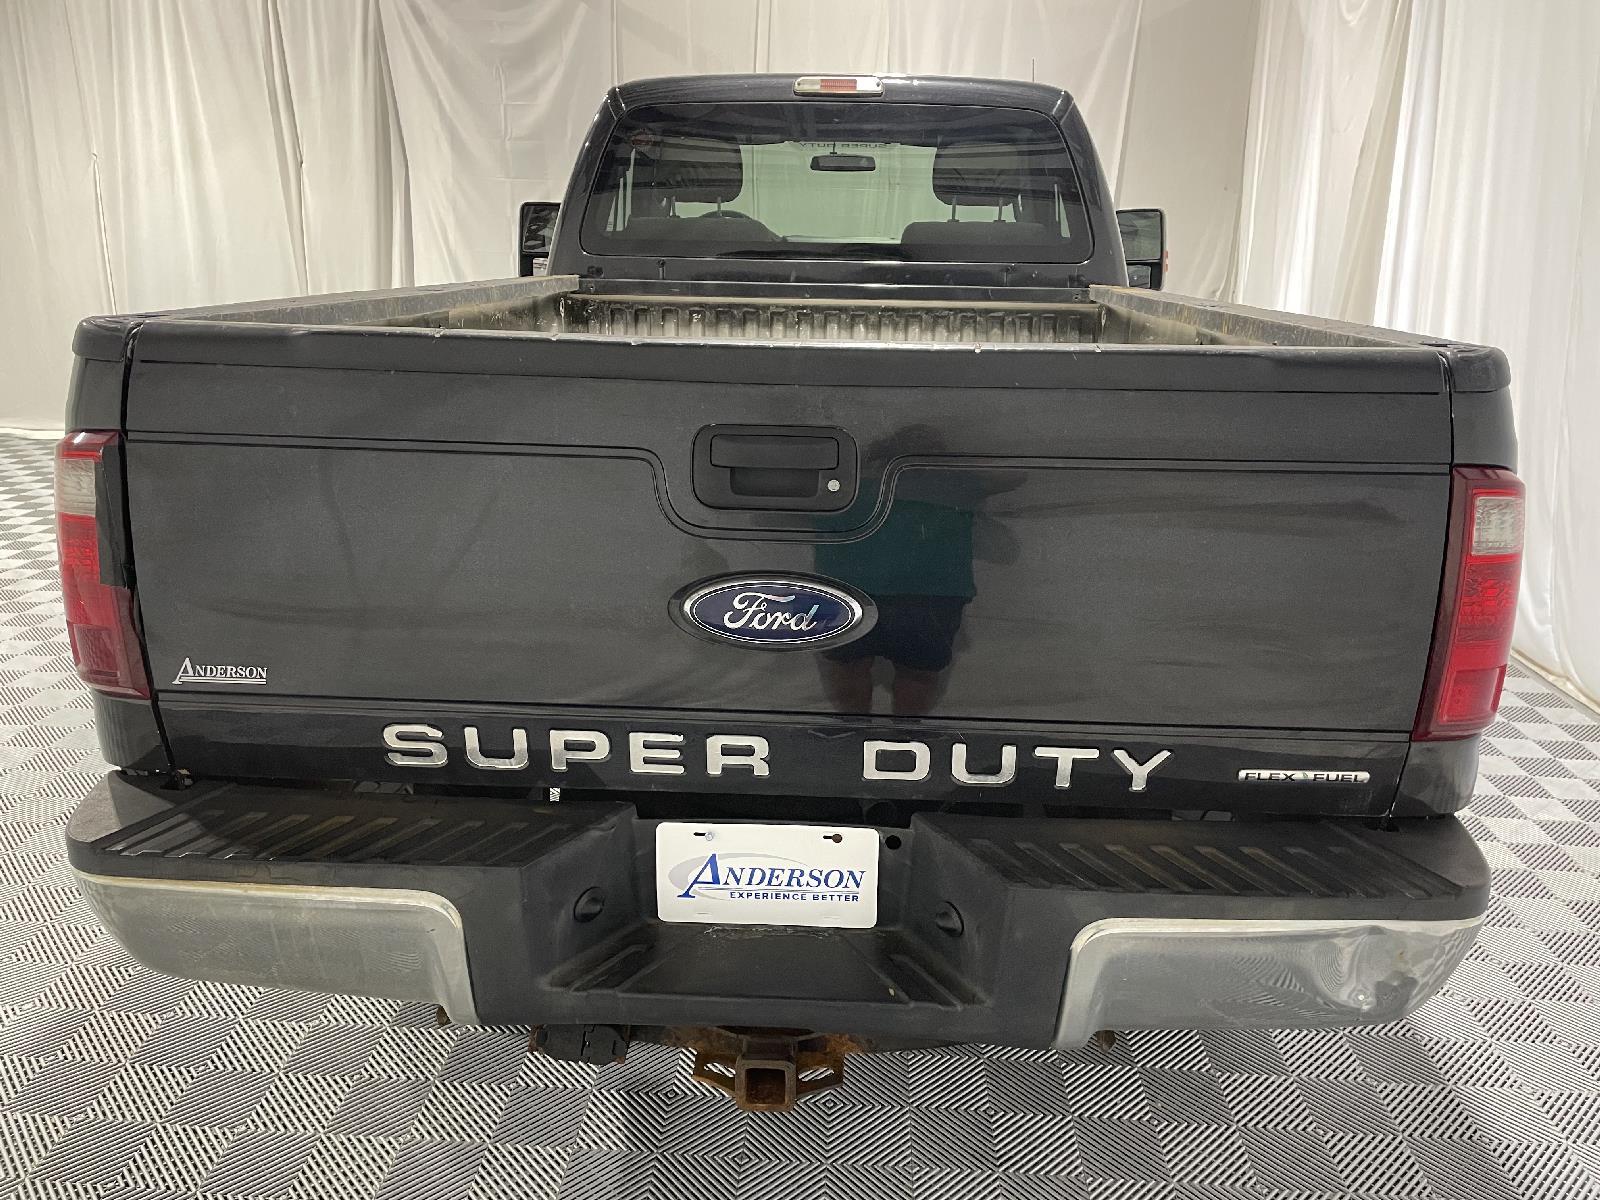 Used 2015 Ford Super Duty F-350 SRW XLT Regular Cab Truck for sale in St Joseph MO